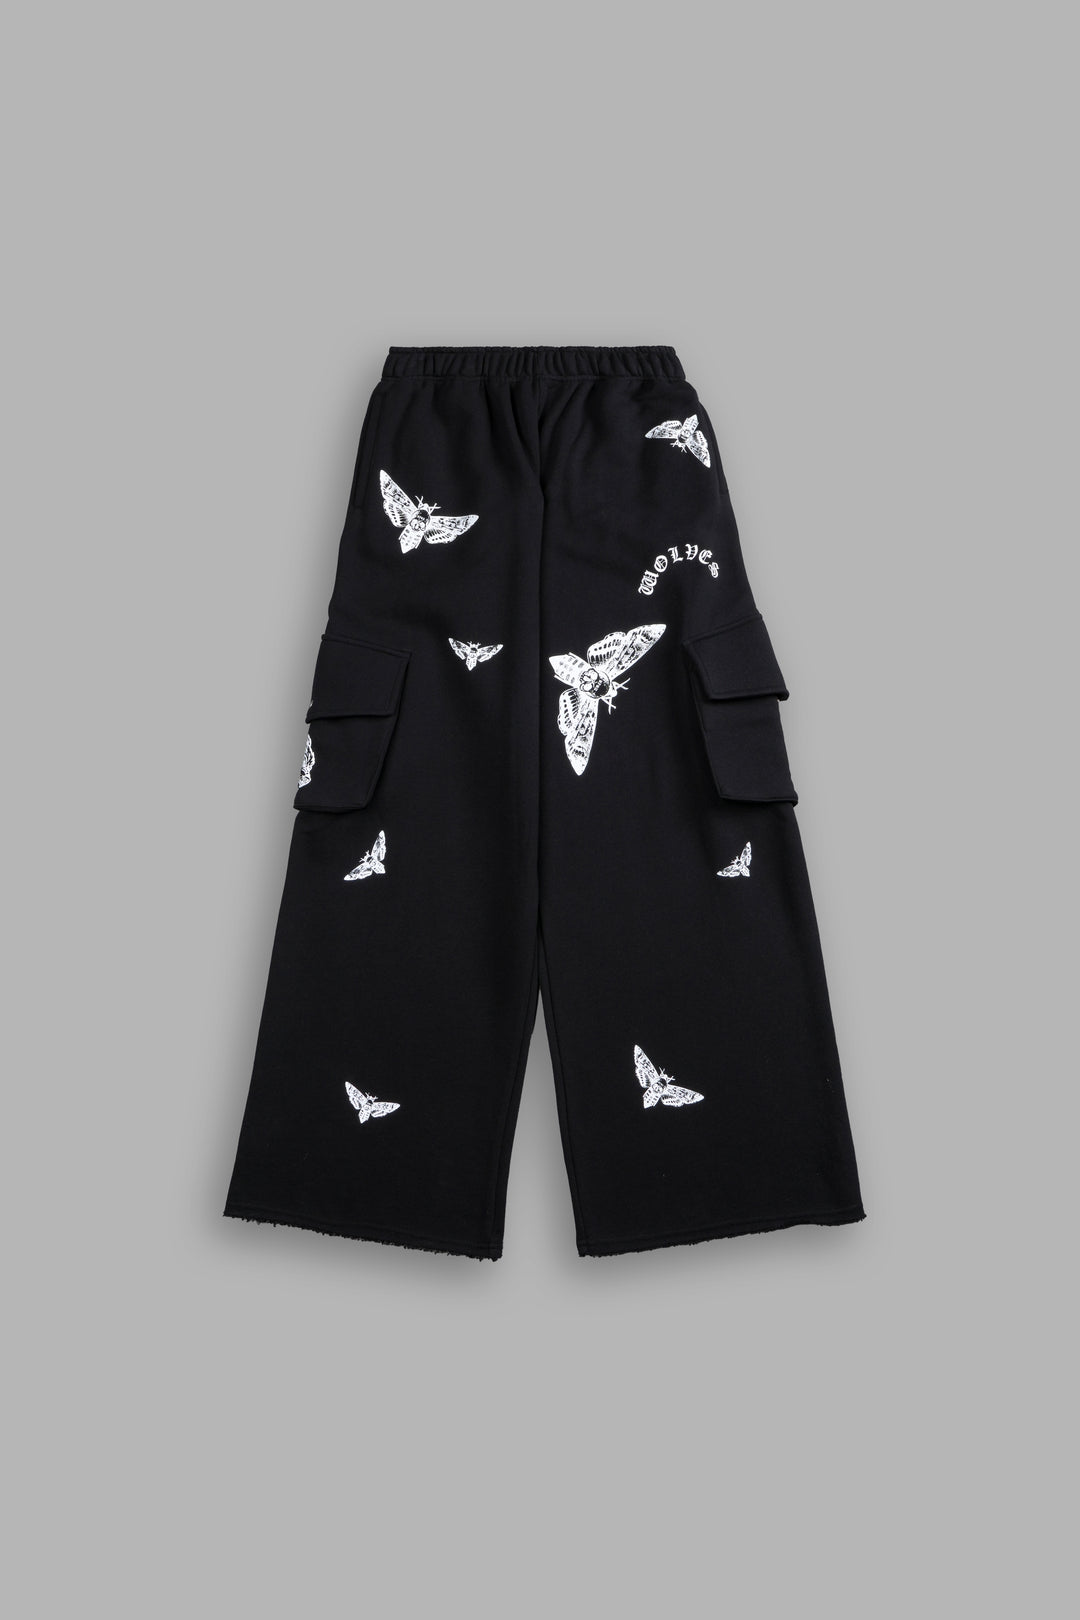 Fly With Us Durst Cargo Sweats in Black